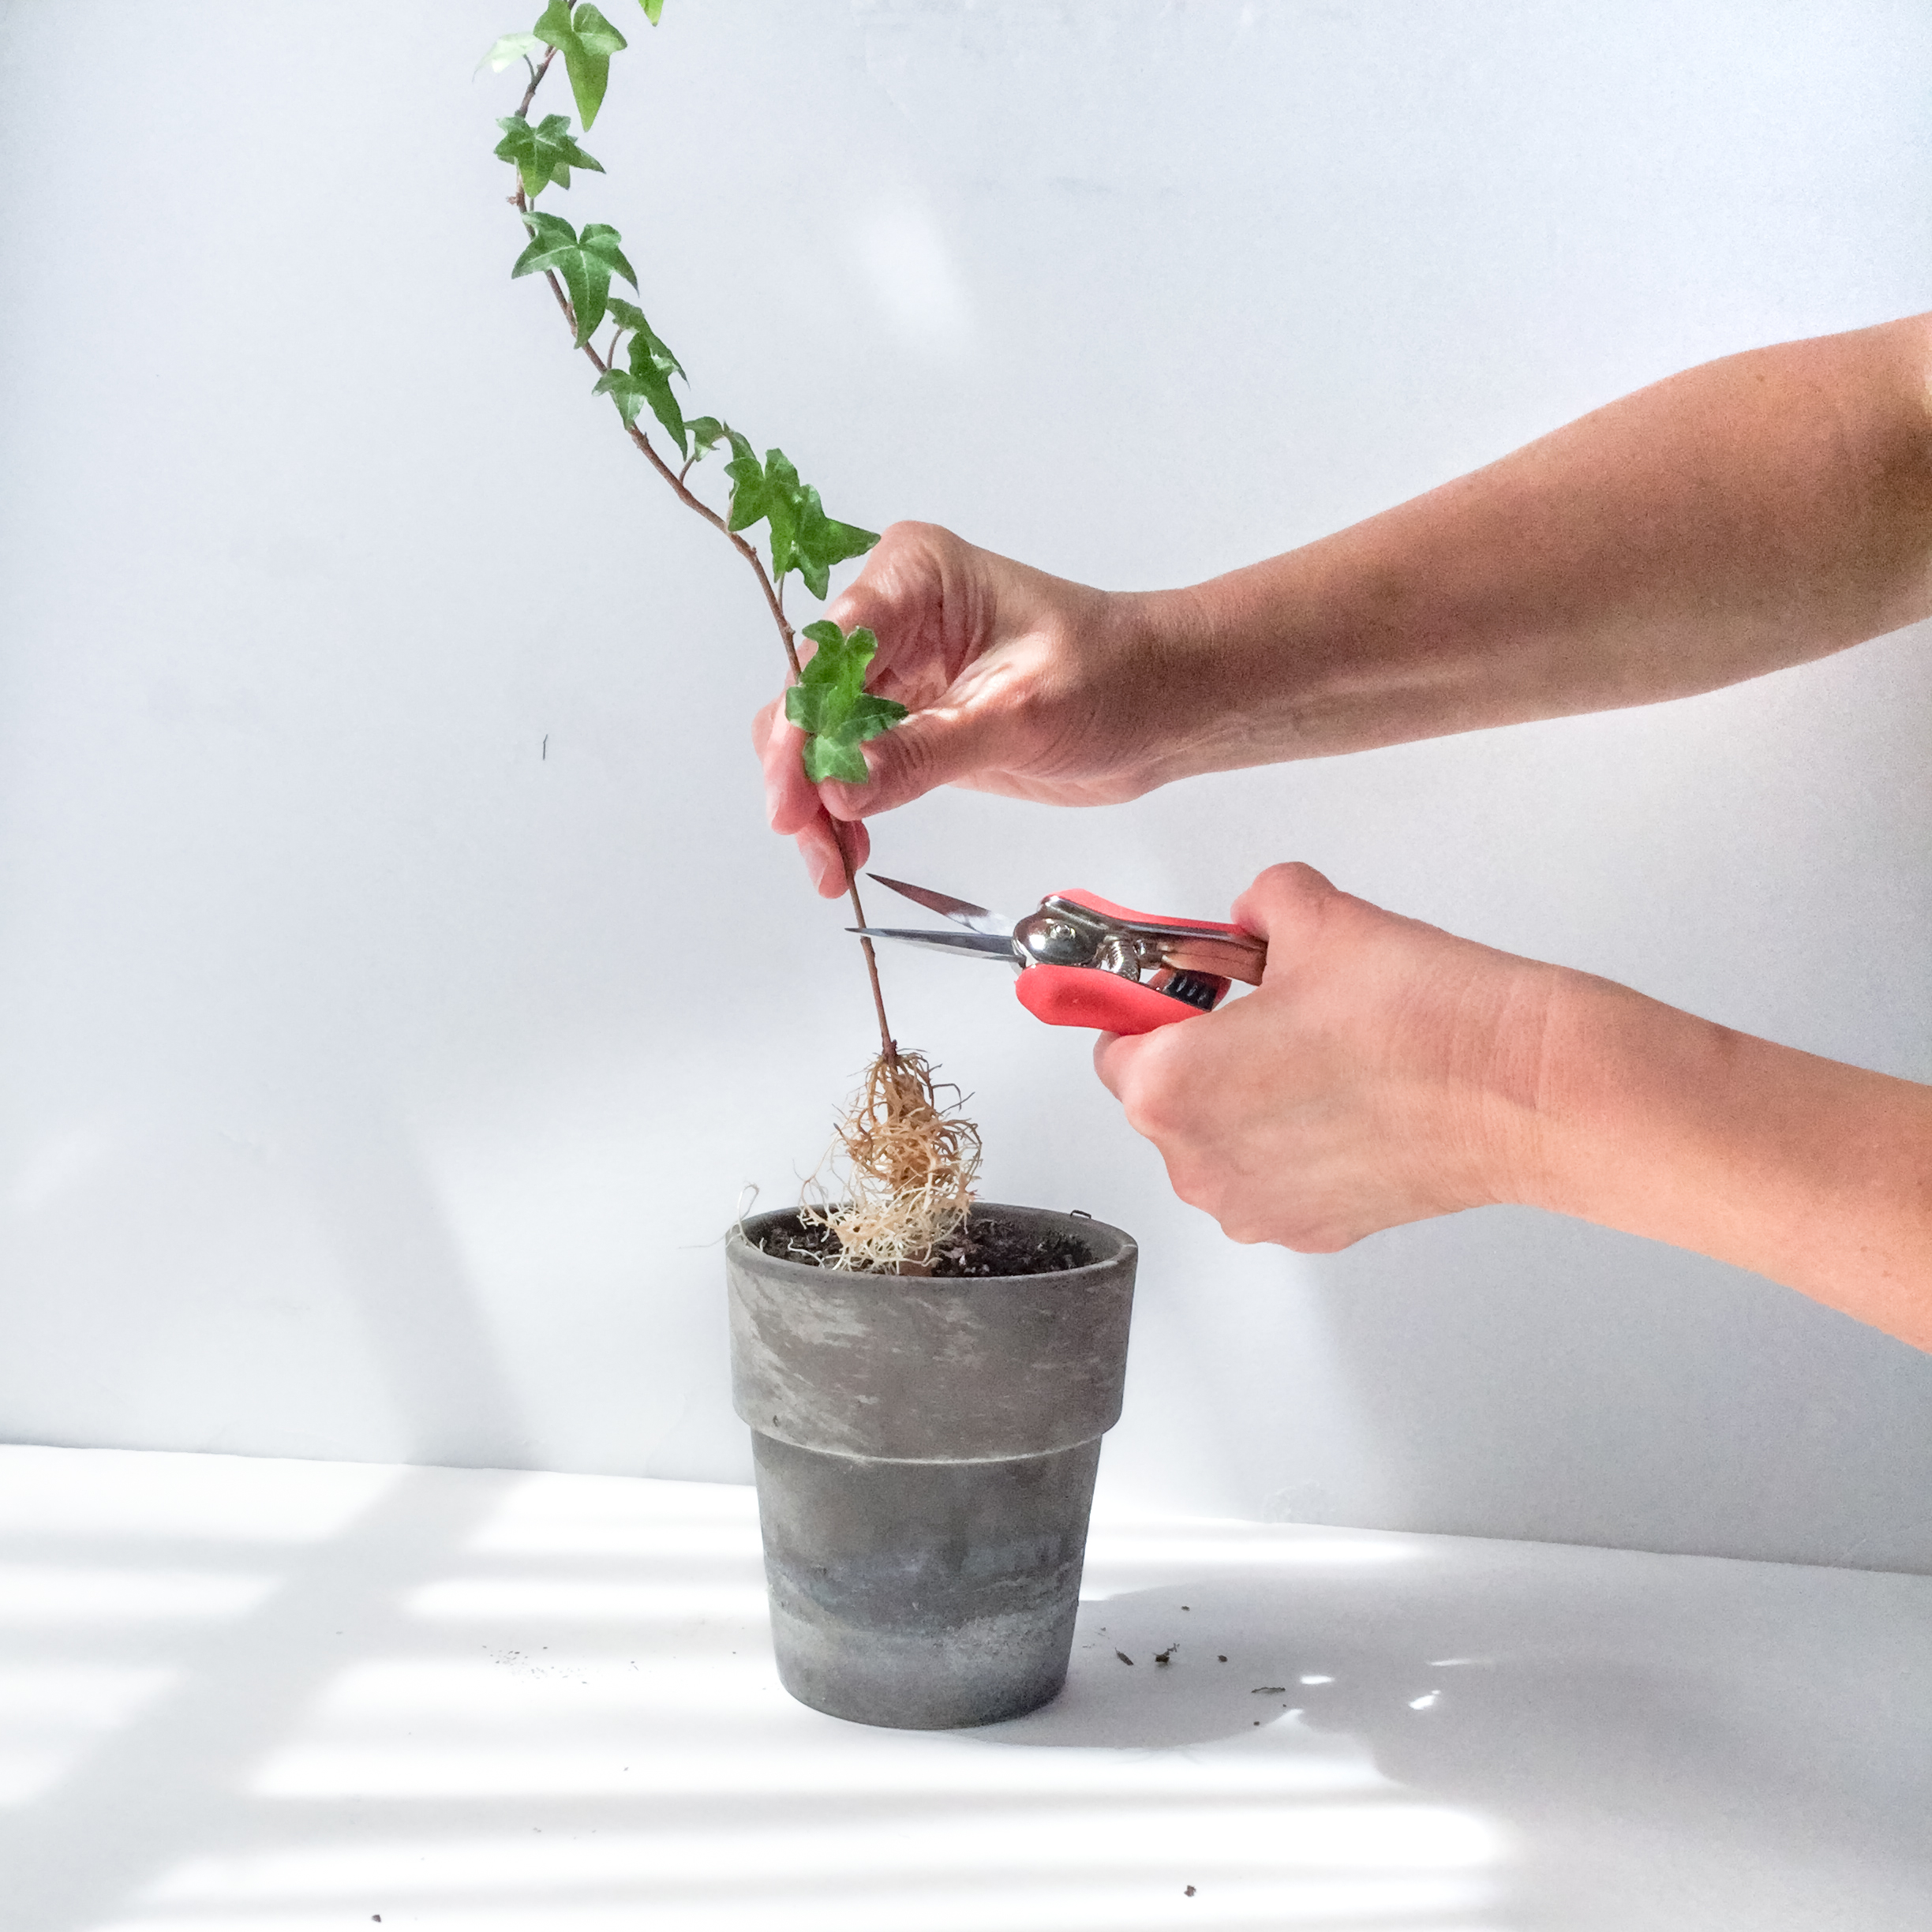 Content marketing and house plants have at least one thing in common - the need for pruning from time to time.